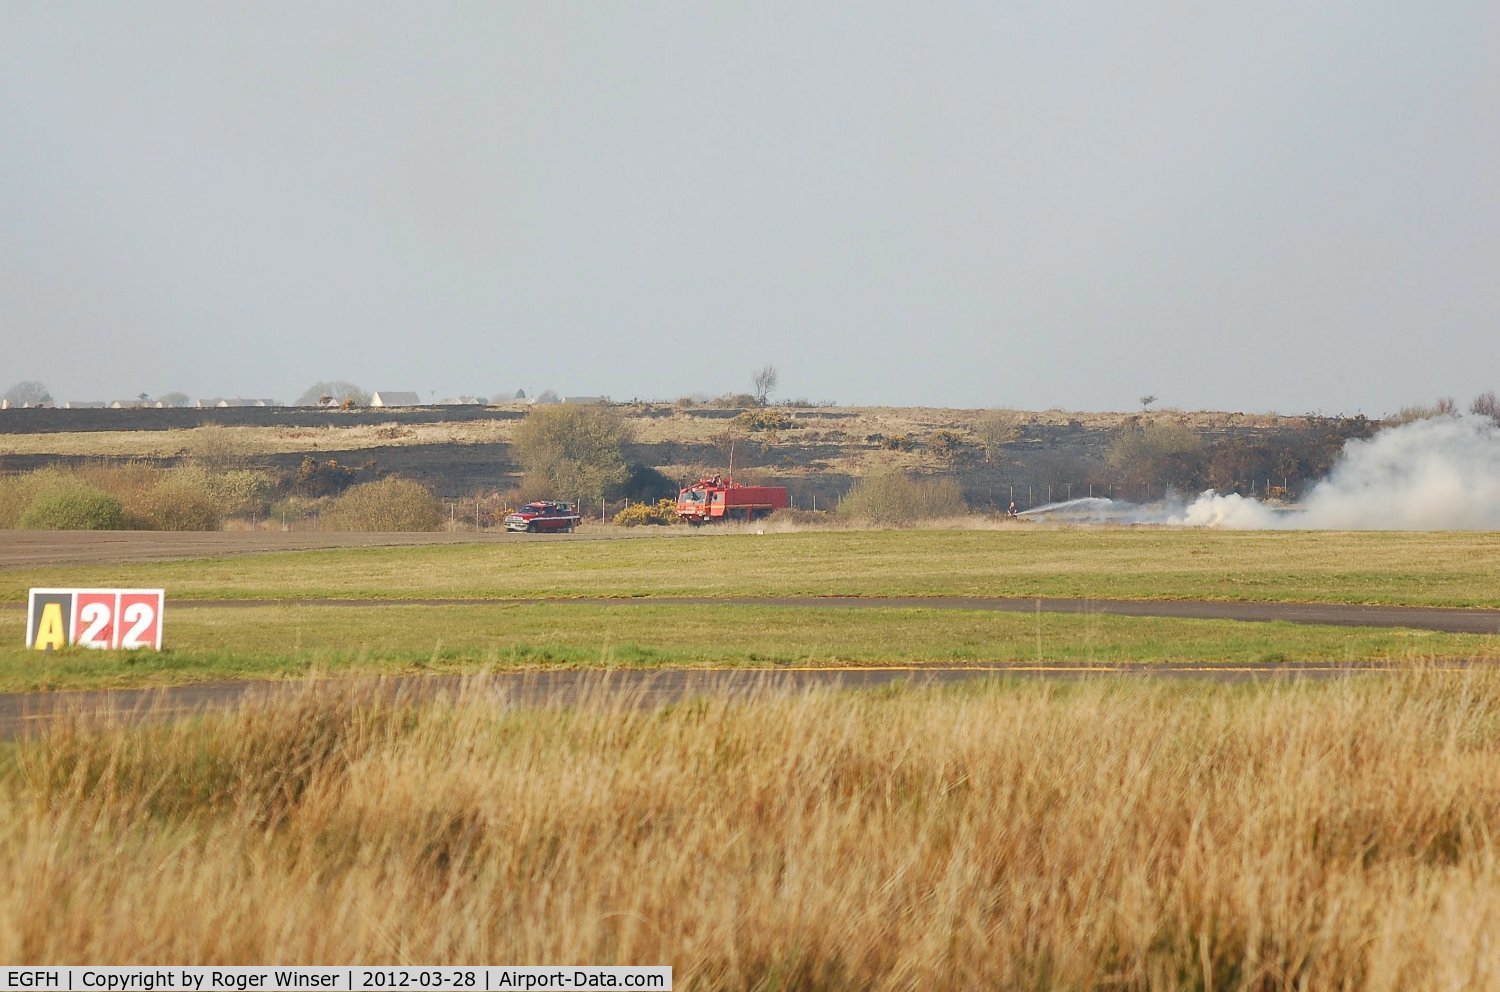 Swansea Airport, Swansea, Wales United Kingdom (EGFH) - Airport Fire and Rescue Services FIRE 1 and FIRE 2 tackle a blaze on the perimiter of the airfield.